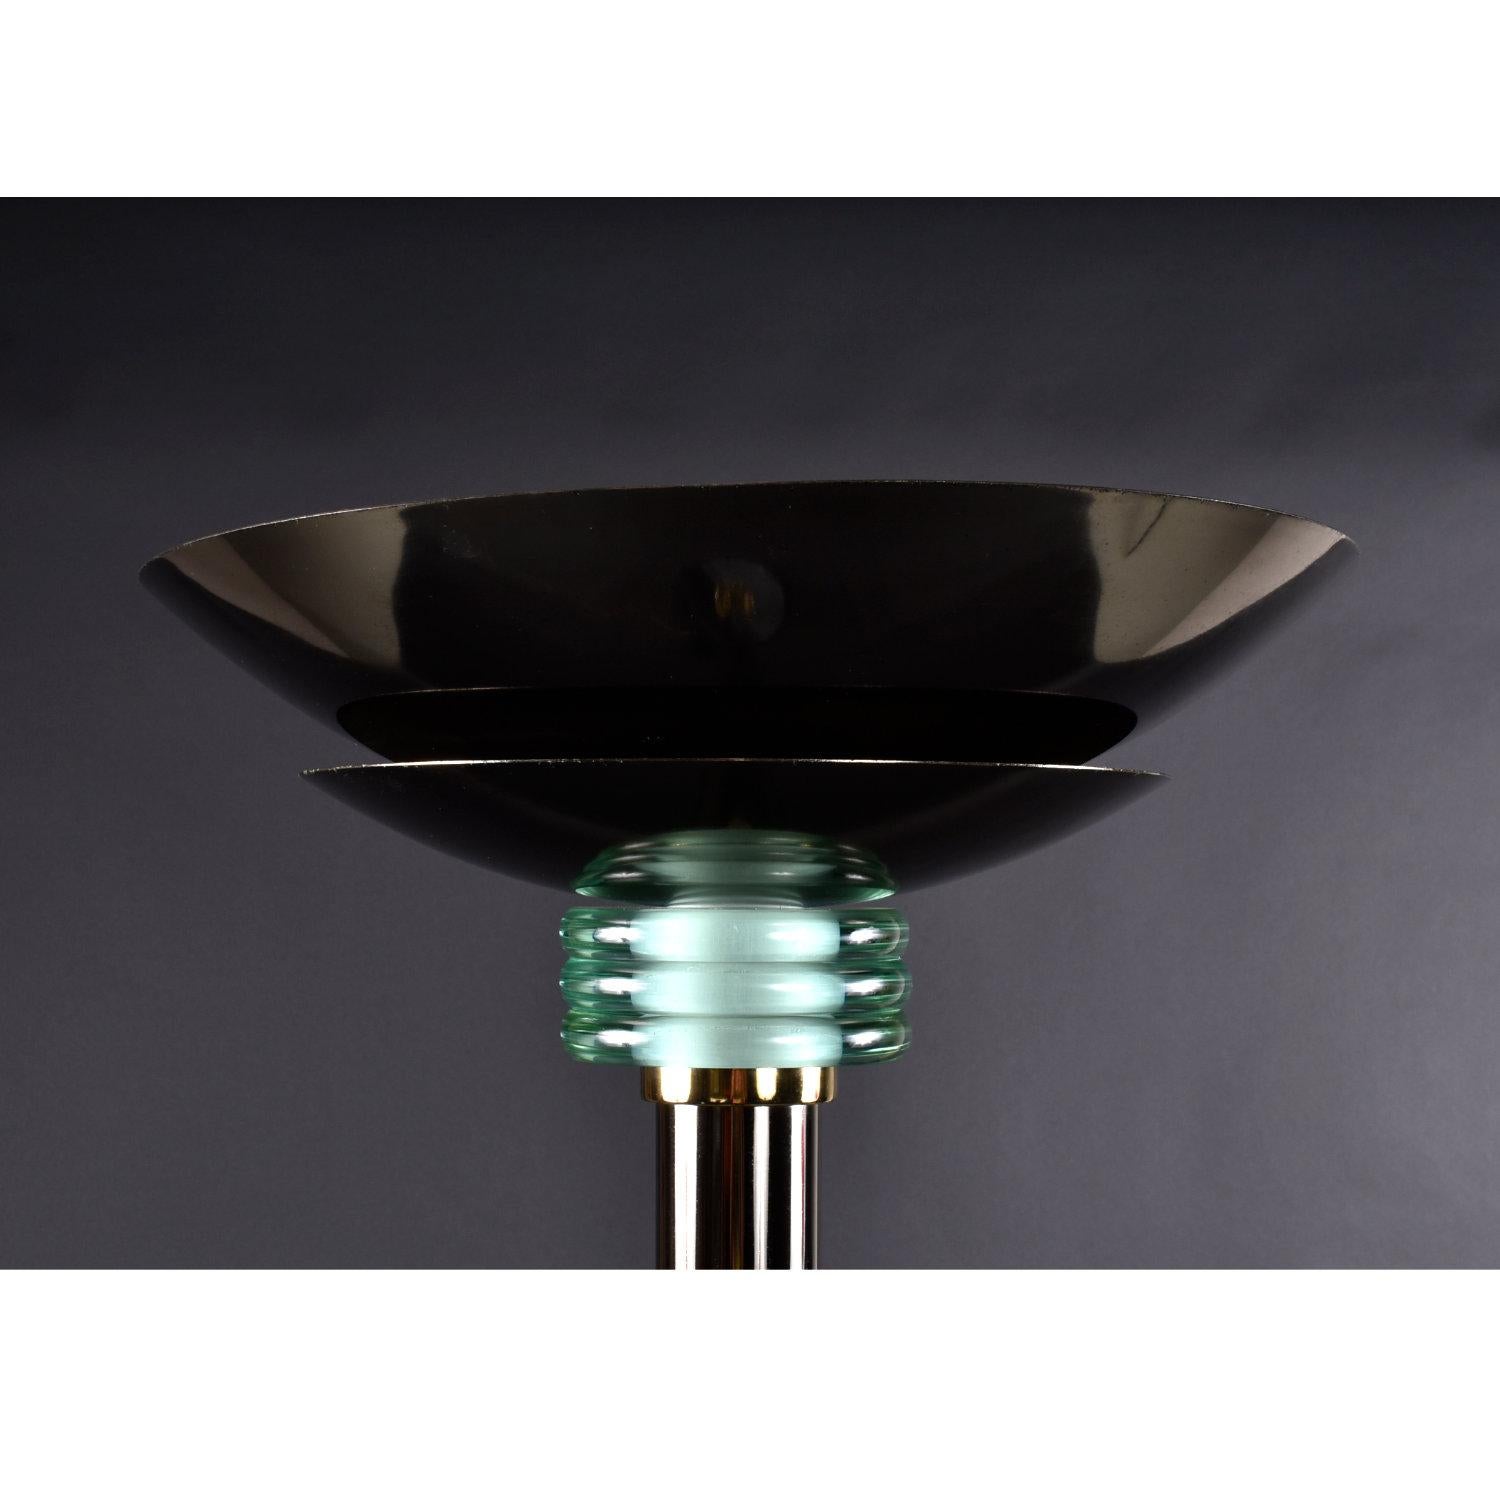 20th Century Casablanca Black and Green Glass Collar Saucer Dimming Torchiere Floor Lamp